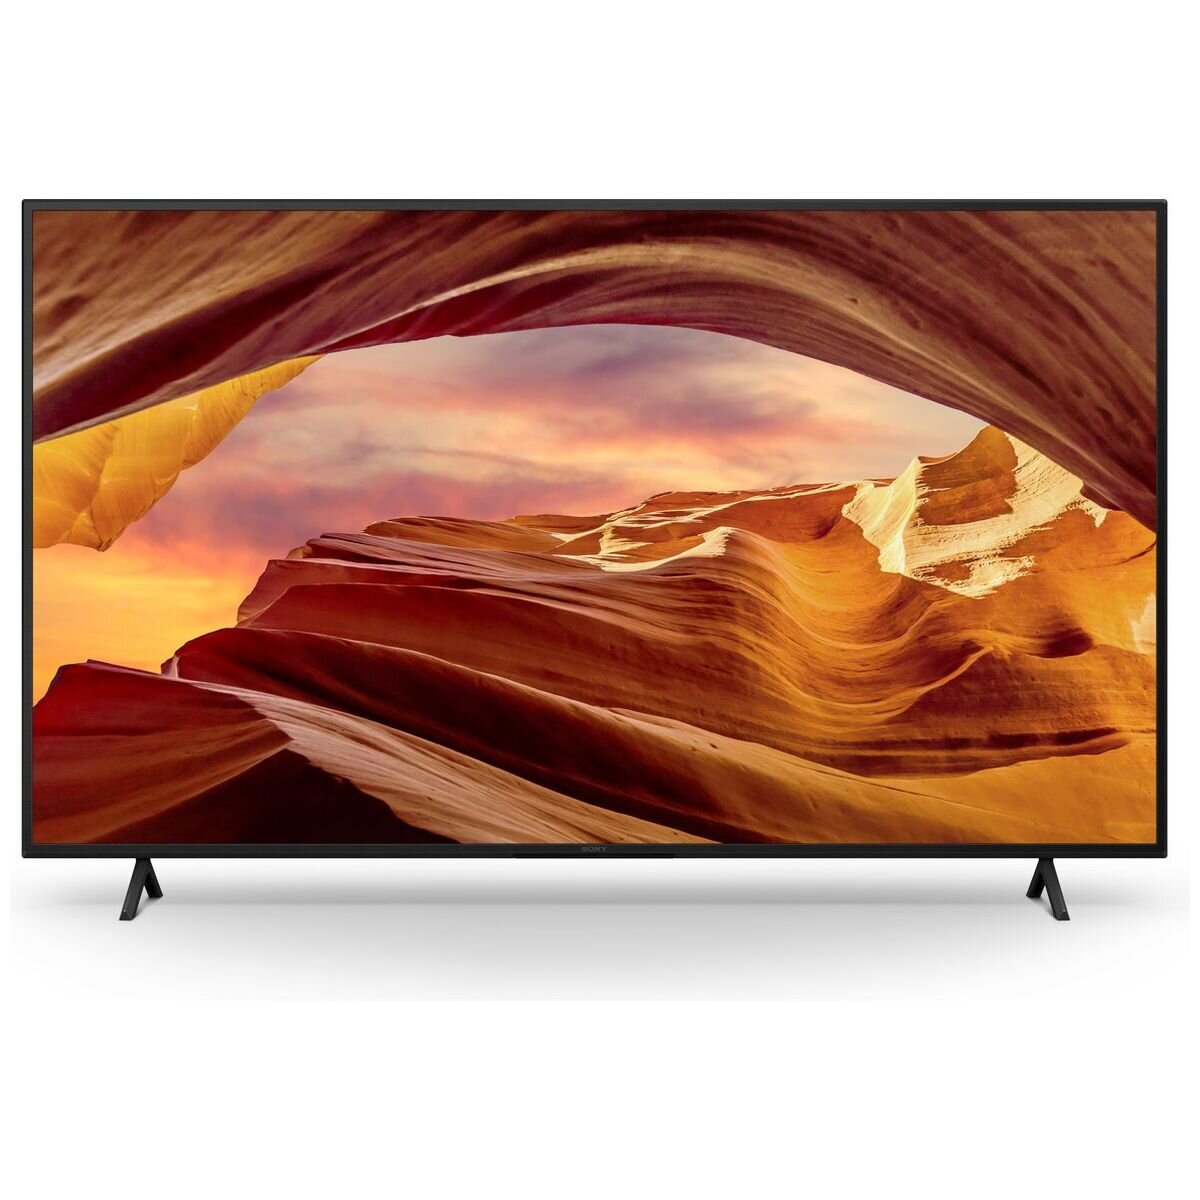 Sony, Bravia, X77L, TV, 50", Entry, 4K, (3840, x, 2160), 450-cd/m2, Brightness, HDR10, HLG, Android, TV, Google, TV, 3, Year, Ons, 